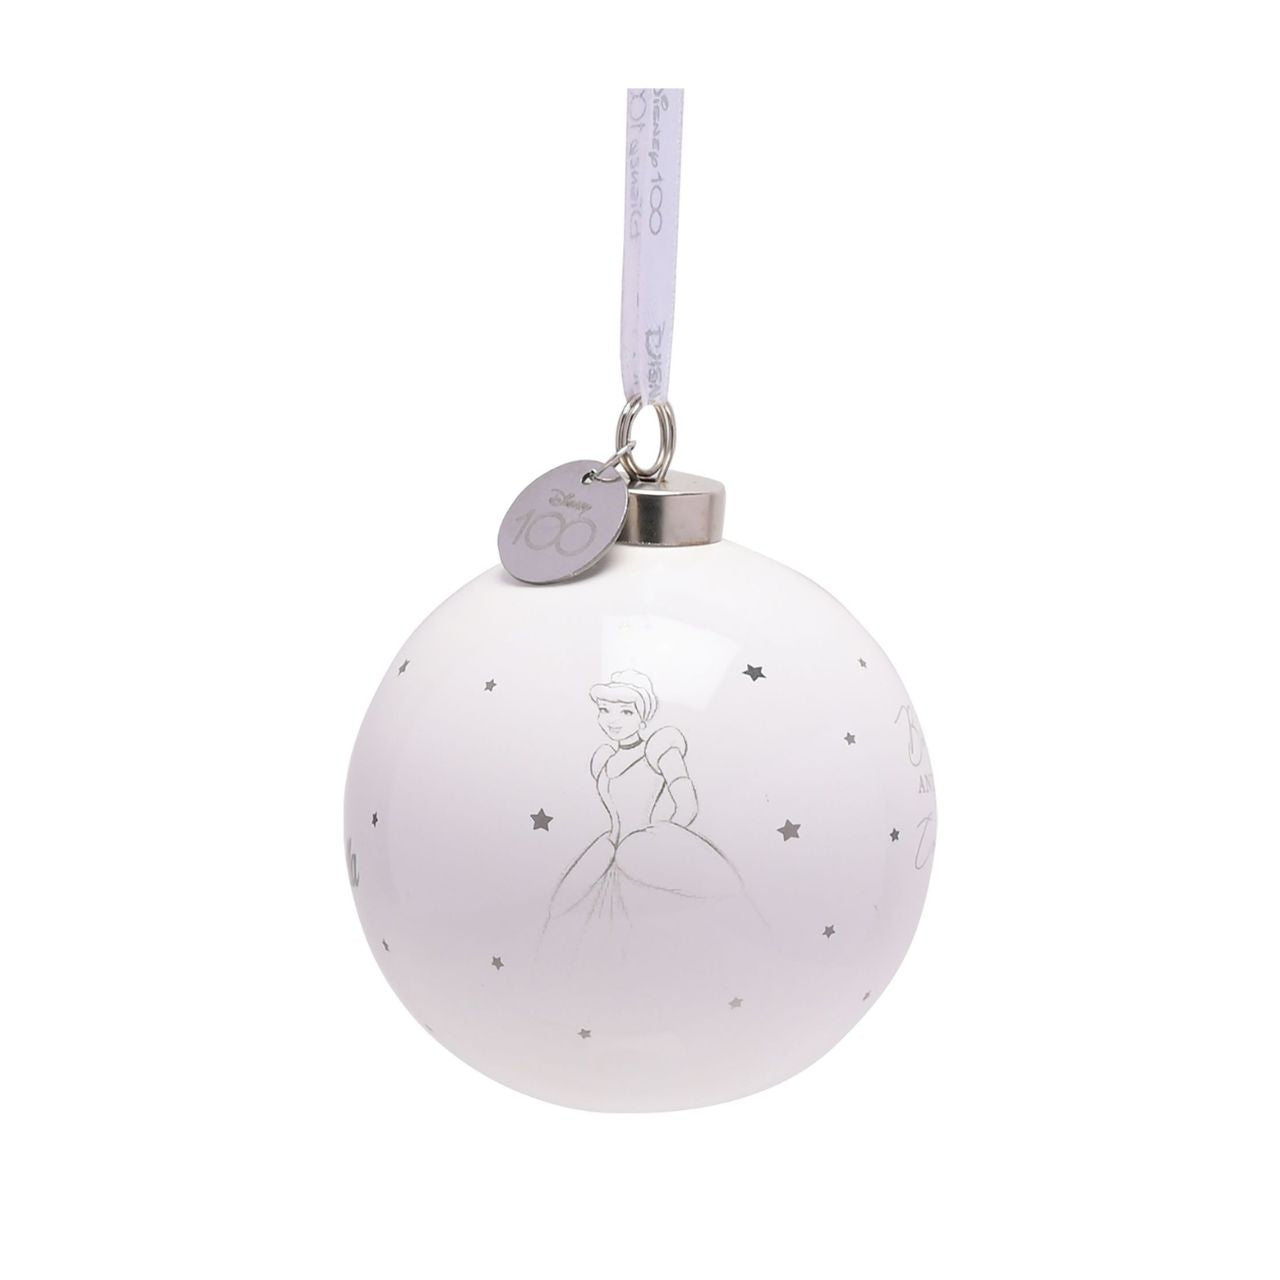 Disney 100 Bauble - Cinderella  A Cinderella bauble from Disney 100 by DISNEY.  This limited edition tree decoration captures the true magic of Disney on its centenary and can be enjoyed by fans of all ages at Christmas.